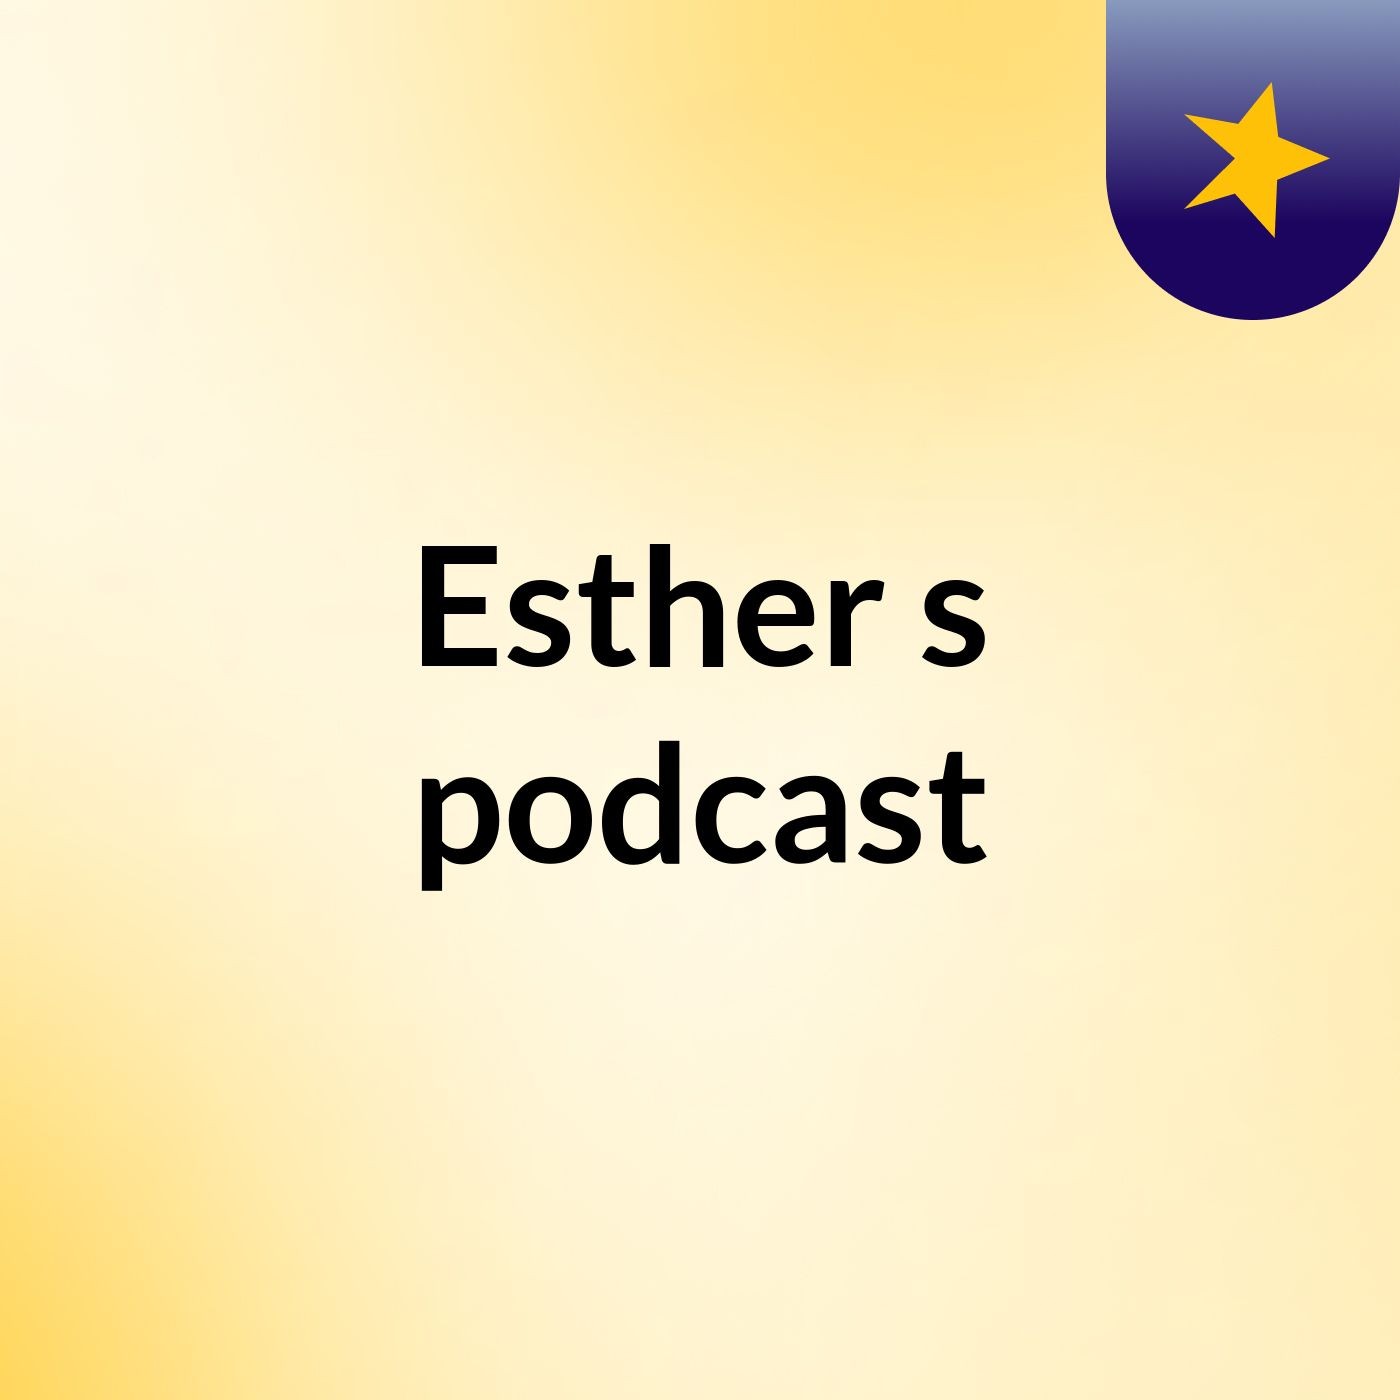 Episode 6 - Esther's podcast